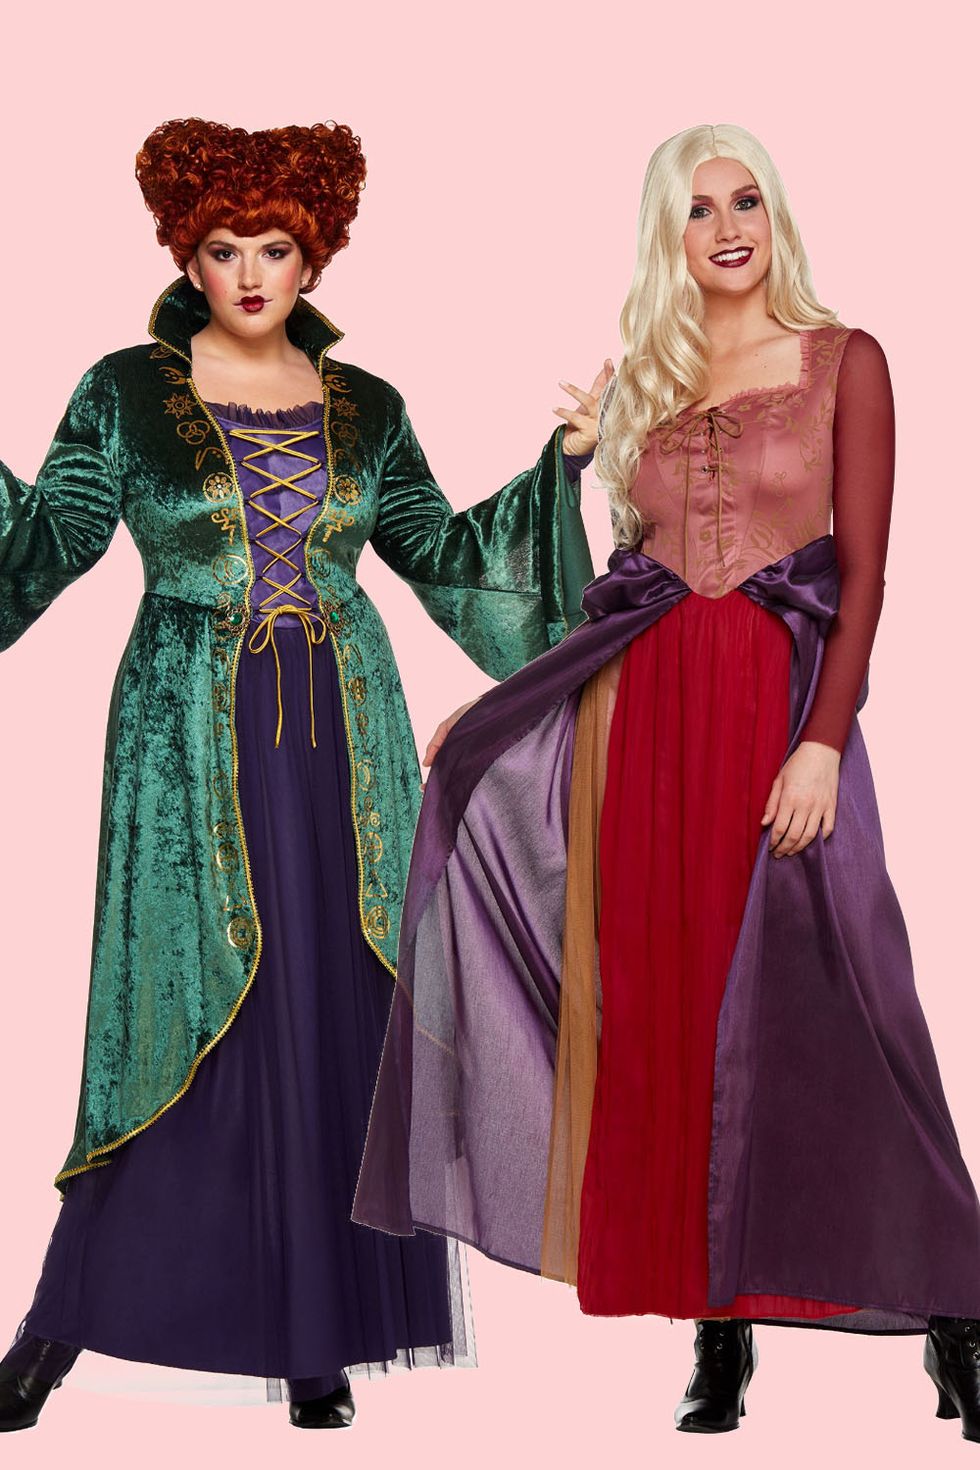 sarah and winifred sanderson halloween costumes for couples